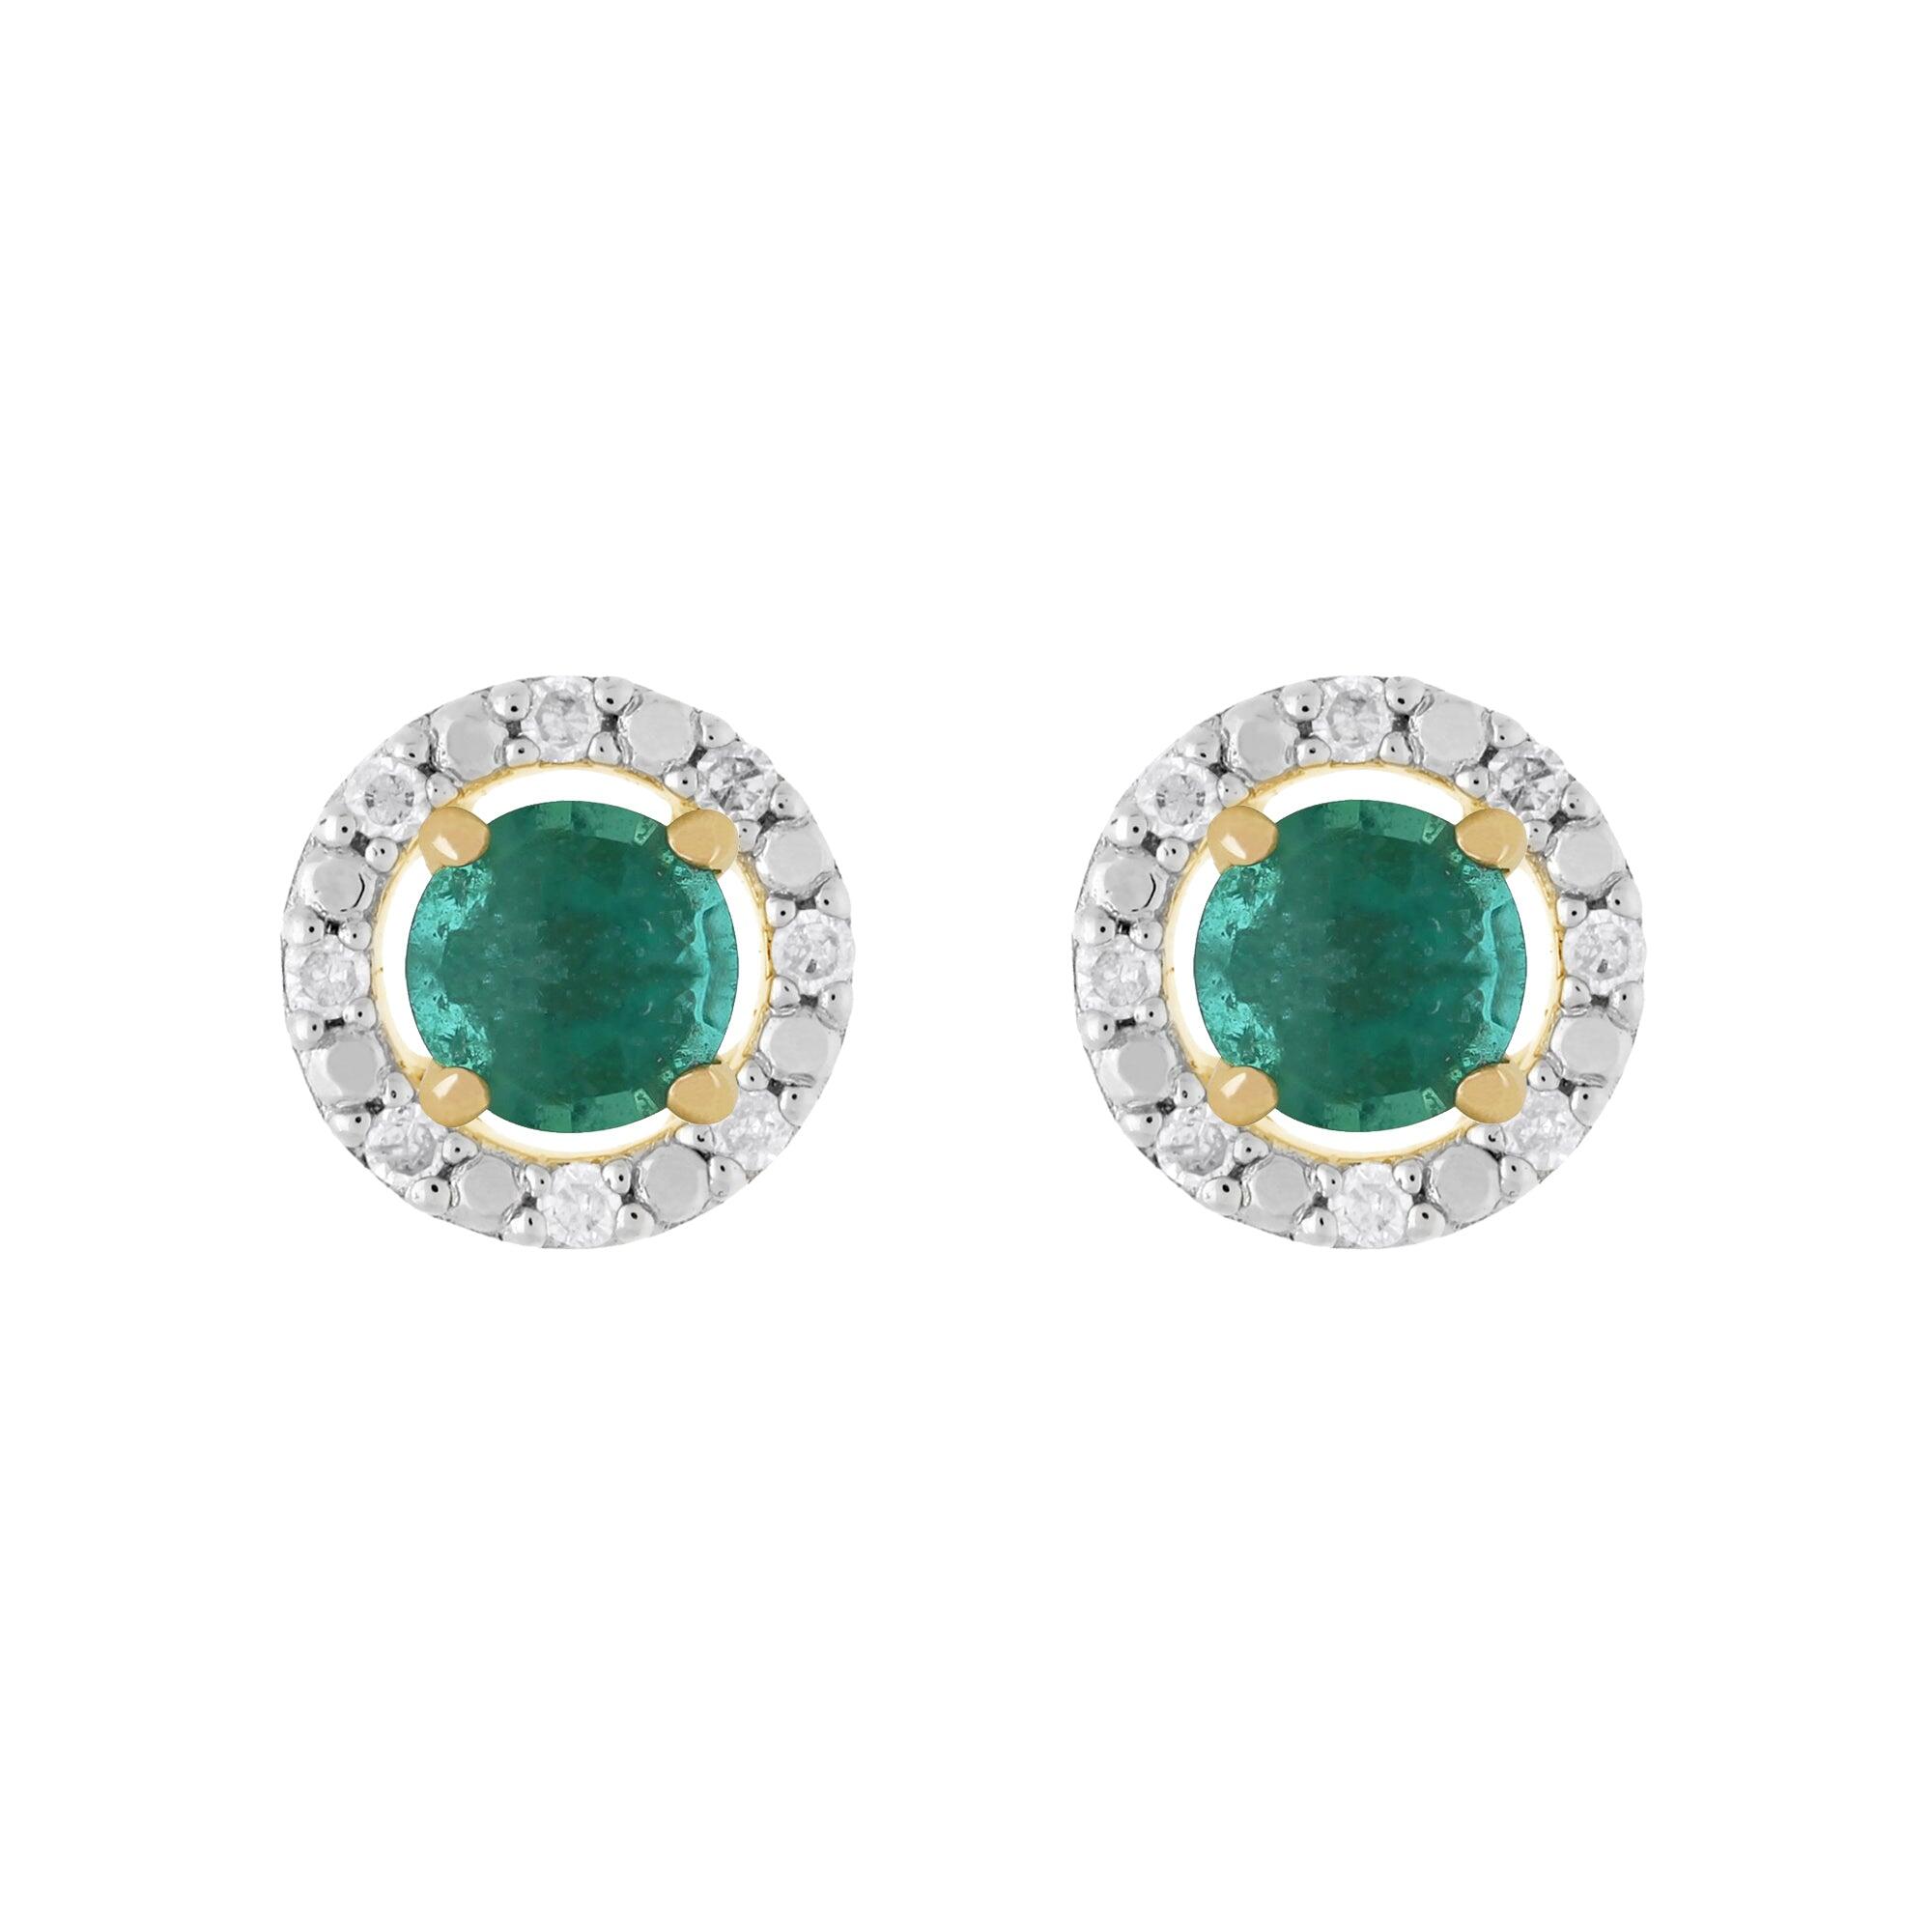 Classic Round Emerald Stud Earrings with Detachable Diamond Round Earrings Jacket Set in 9ct Yellow Gold